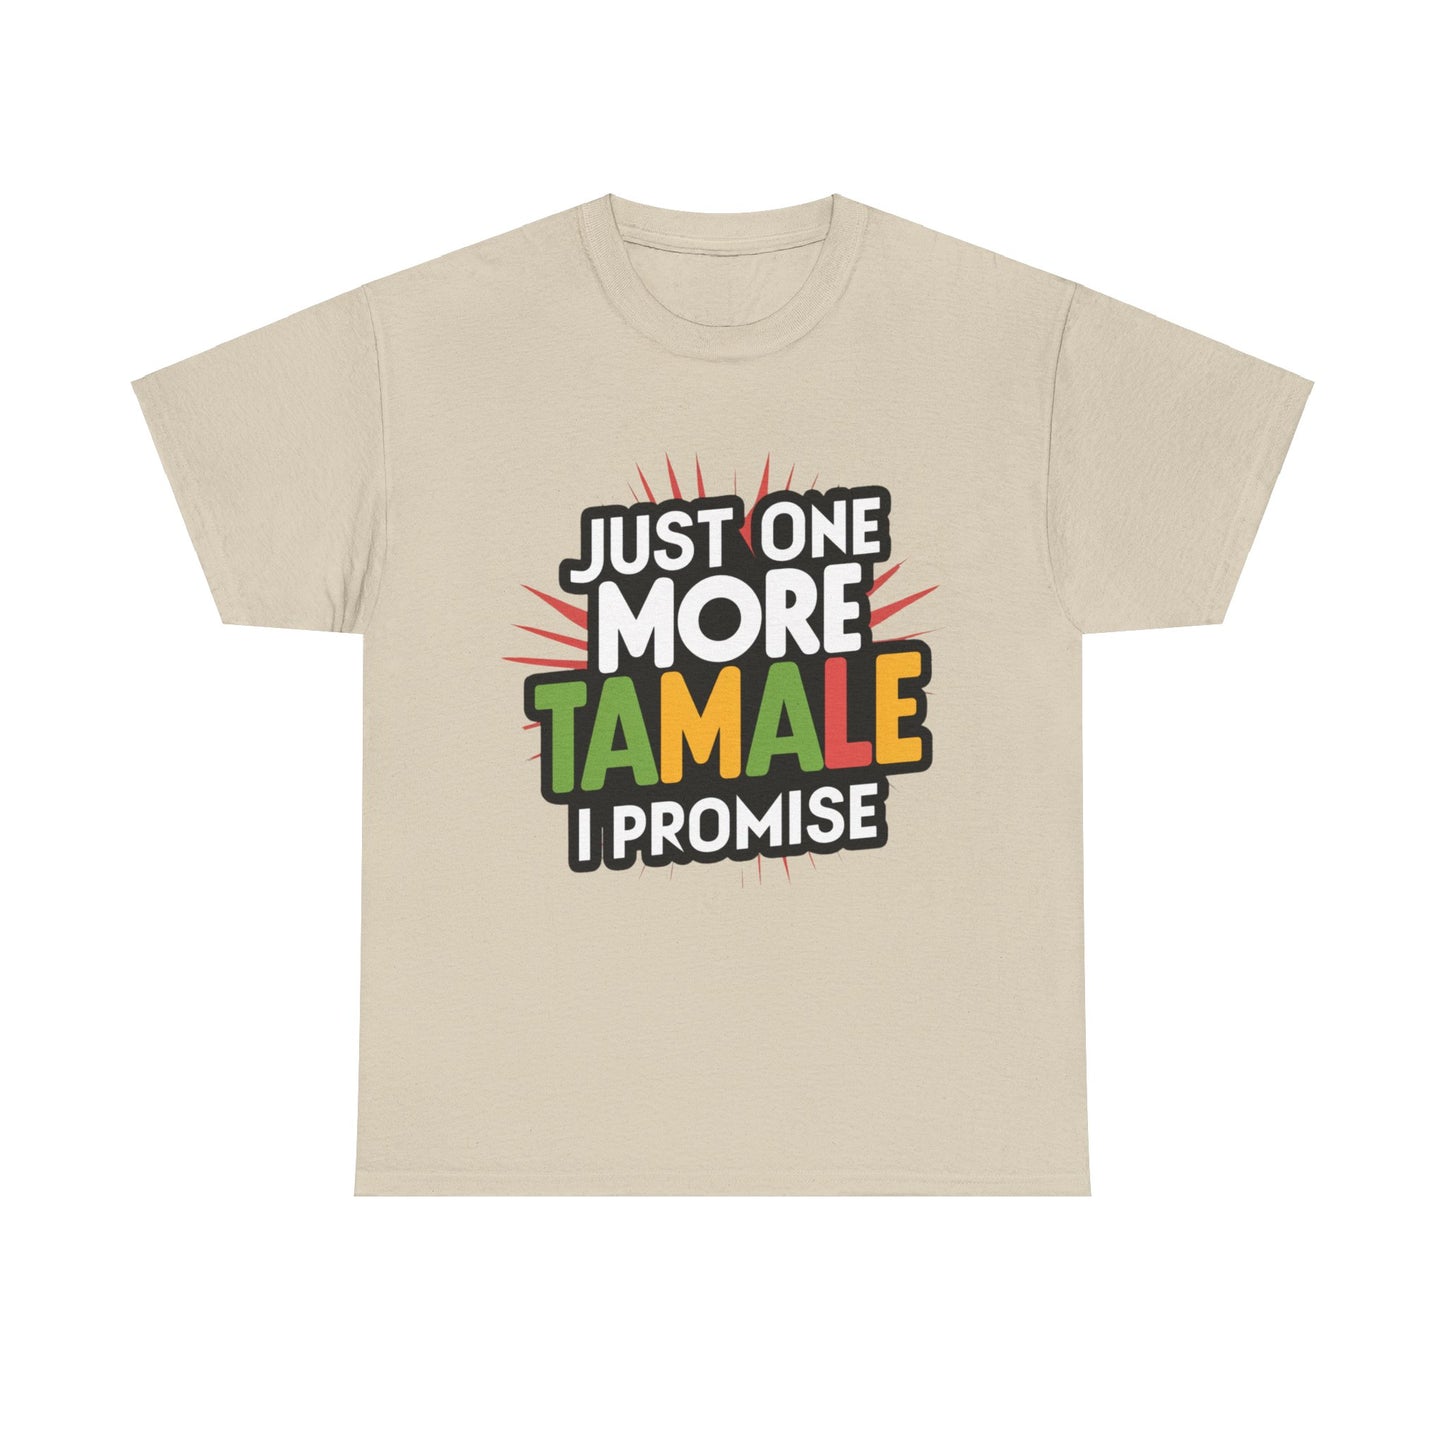 Just One More Tamale I Promise Mexican Food Graphic Unisex Heavy Cotton Tee Cotton Funny Humorous Graphic Soft Premium Unisex Men Women Sand T-shirt Birthday Gift-8